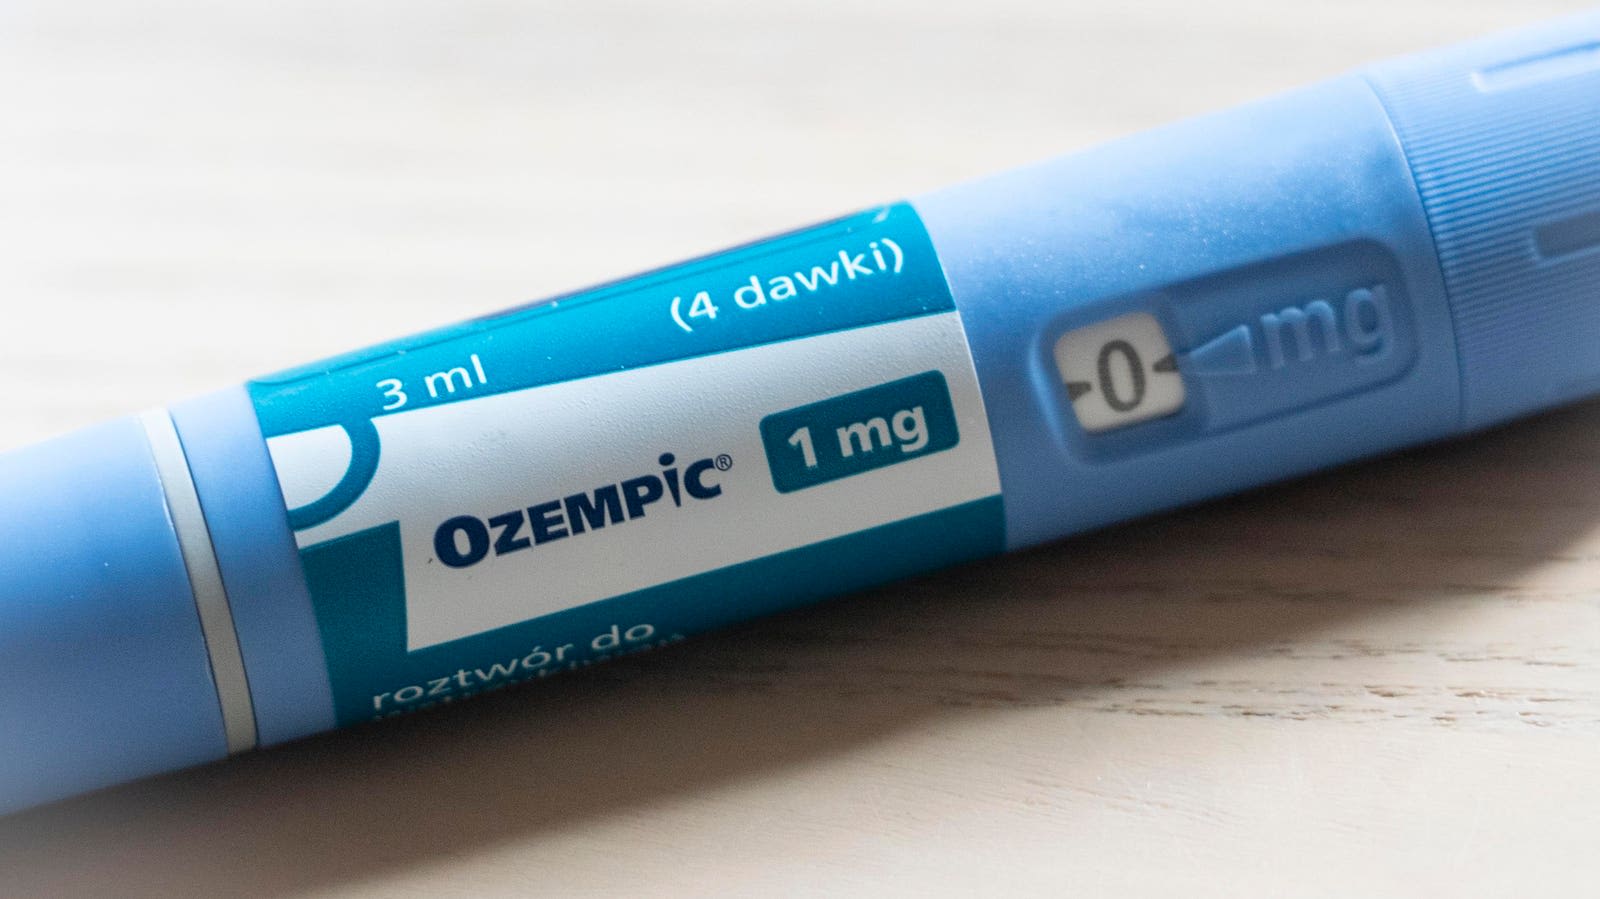 Some Health Care Providers Are Prescribing Incorrect Doses Of Compounded Ozempic—Causing Possible Overdoses, FDA Warns